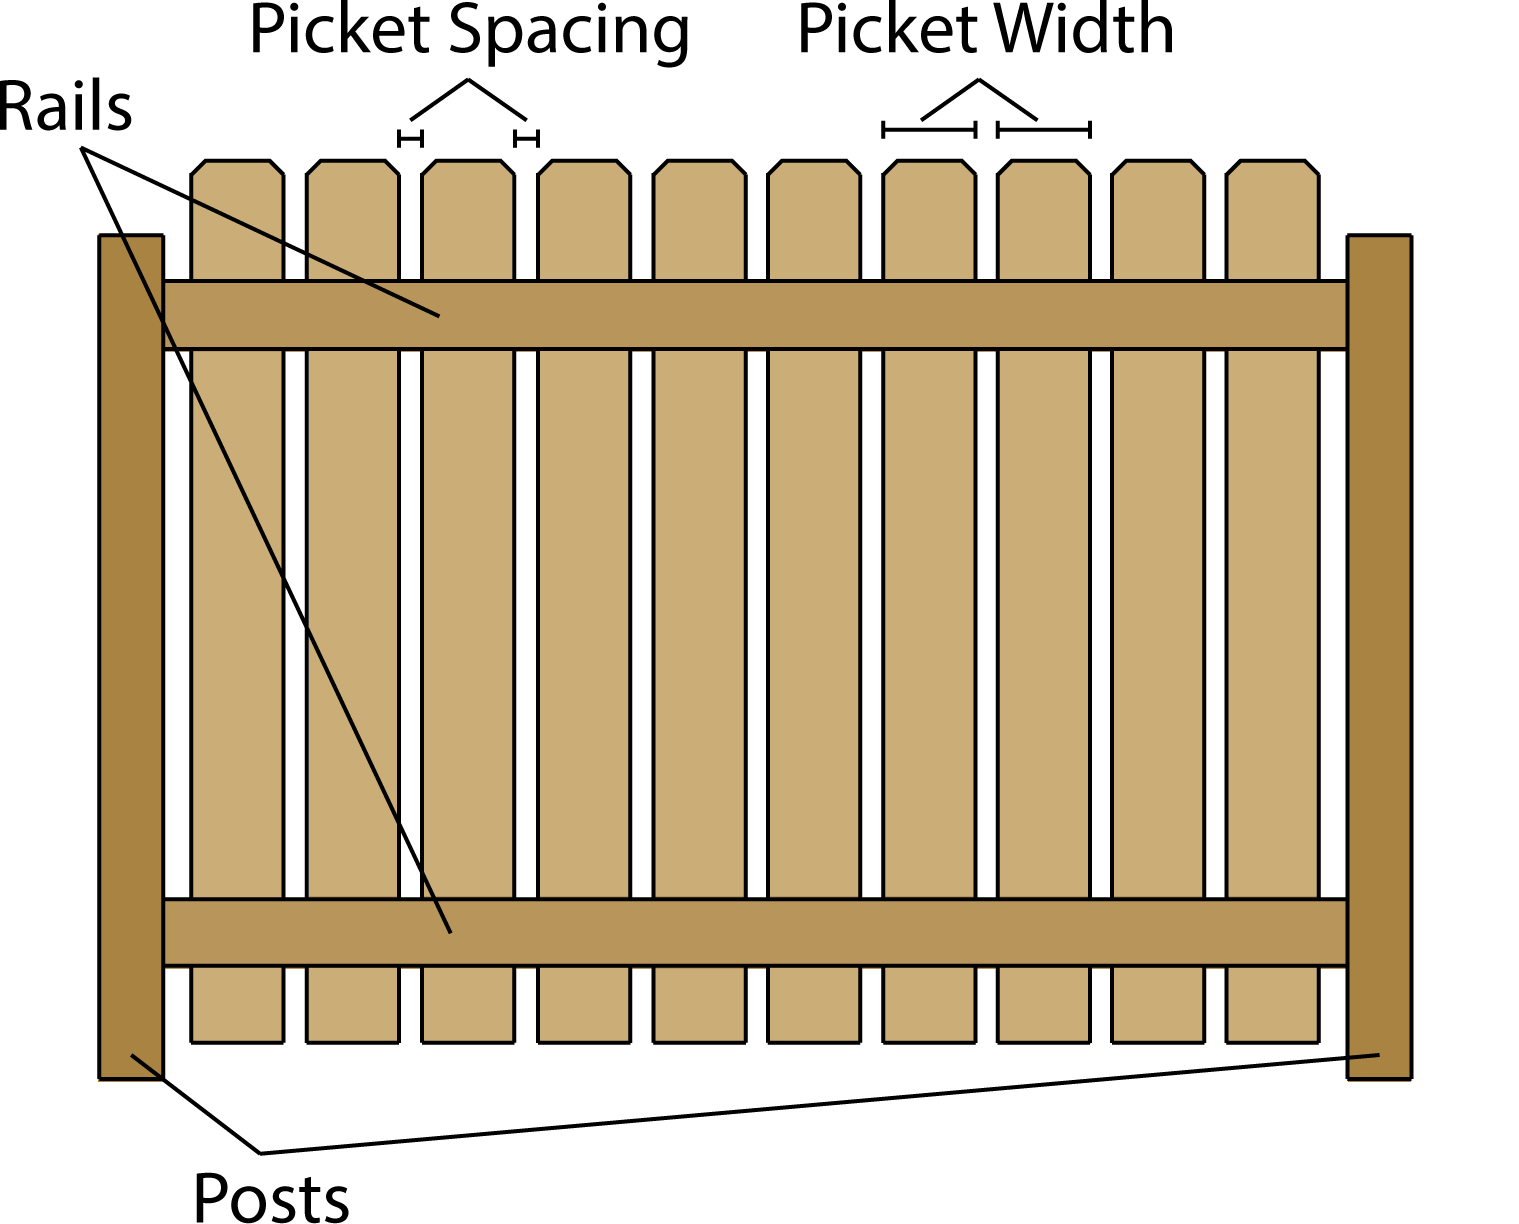 Illustration showing the difference components of a privacy fence, including the posts, rails, pickets, and picket spacing